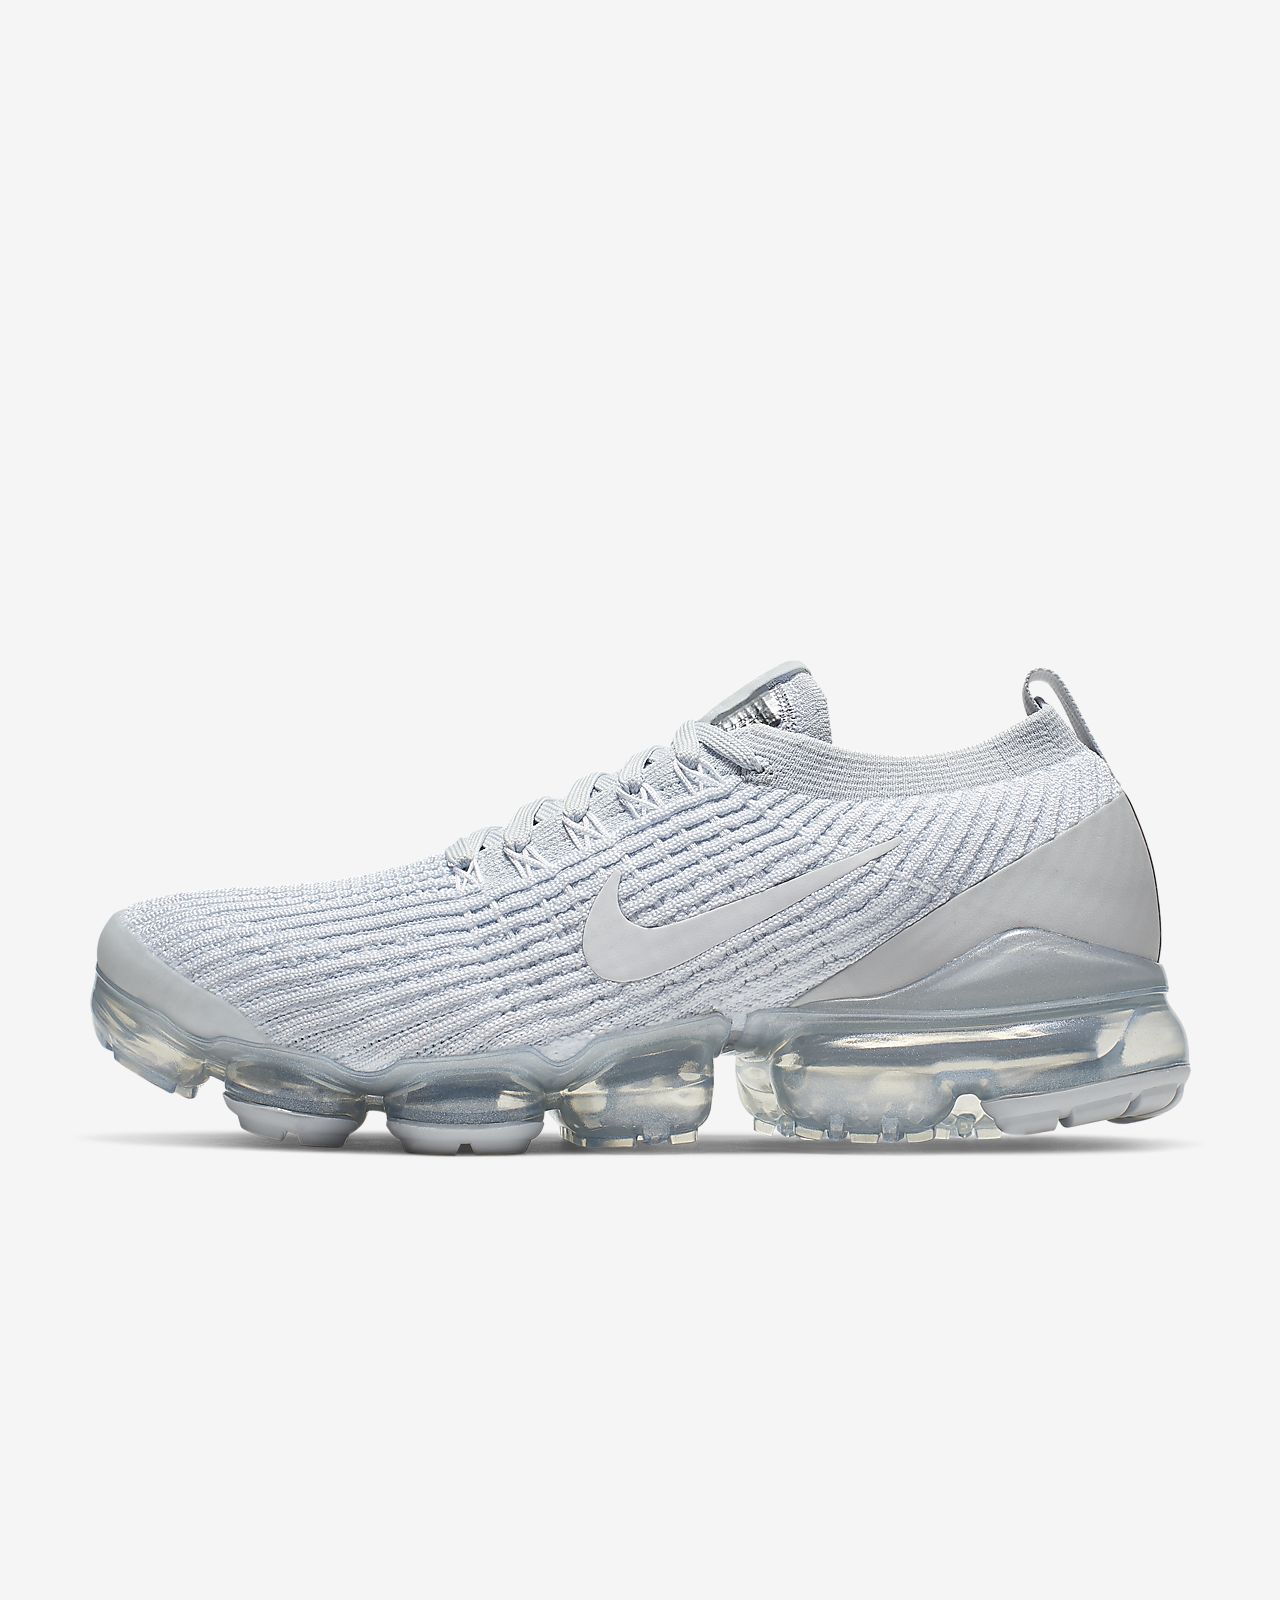 vapormax flyknit ホワイト outlet online 